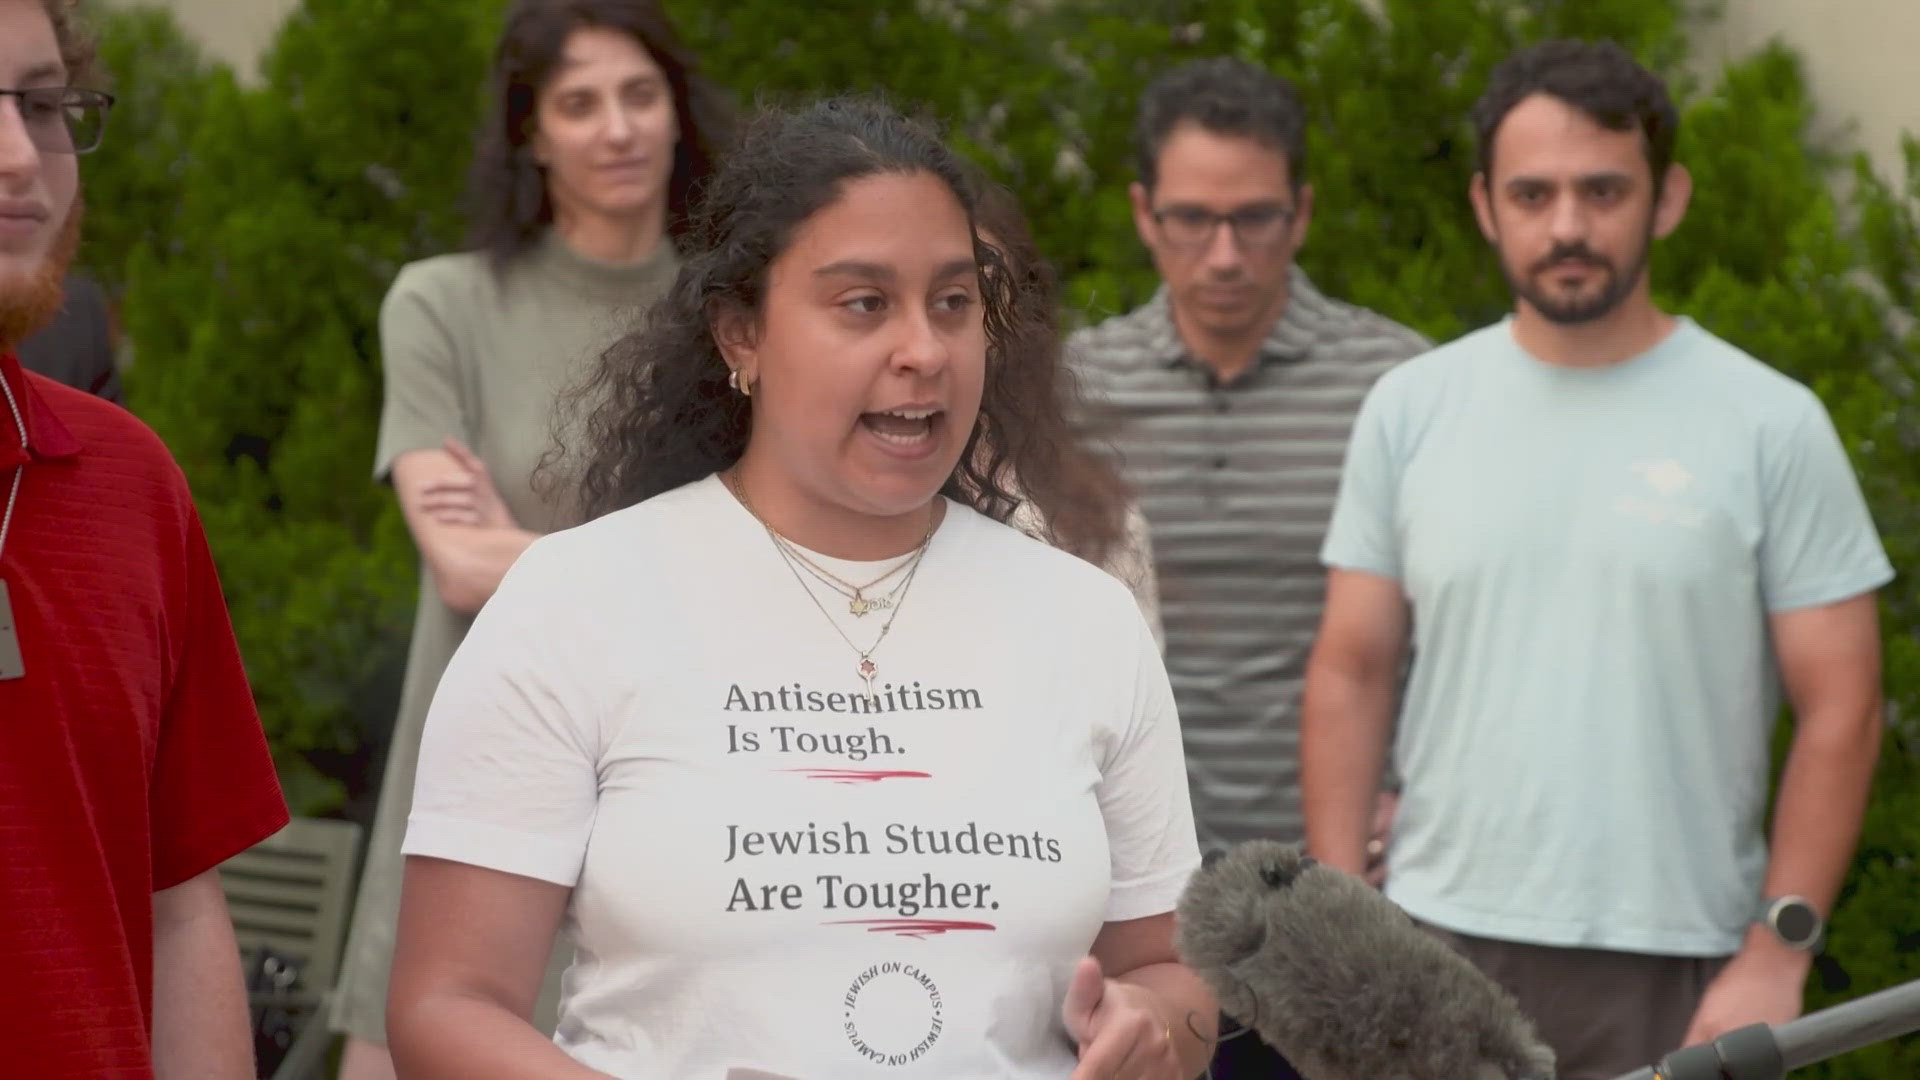 Some students say they want the university to develop a clear definition of what is considered antisemitism on campus.